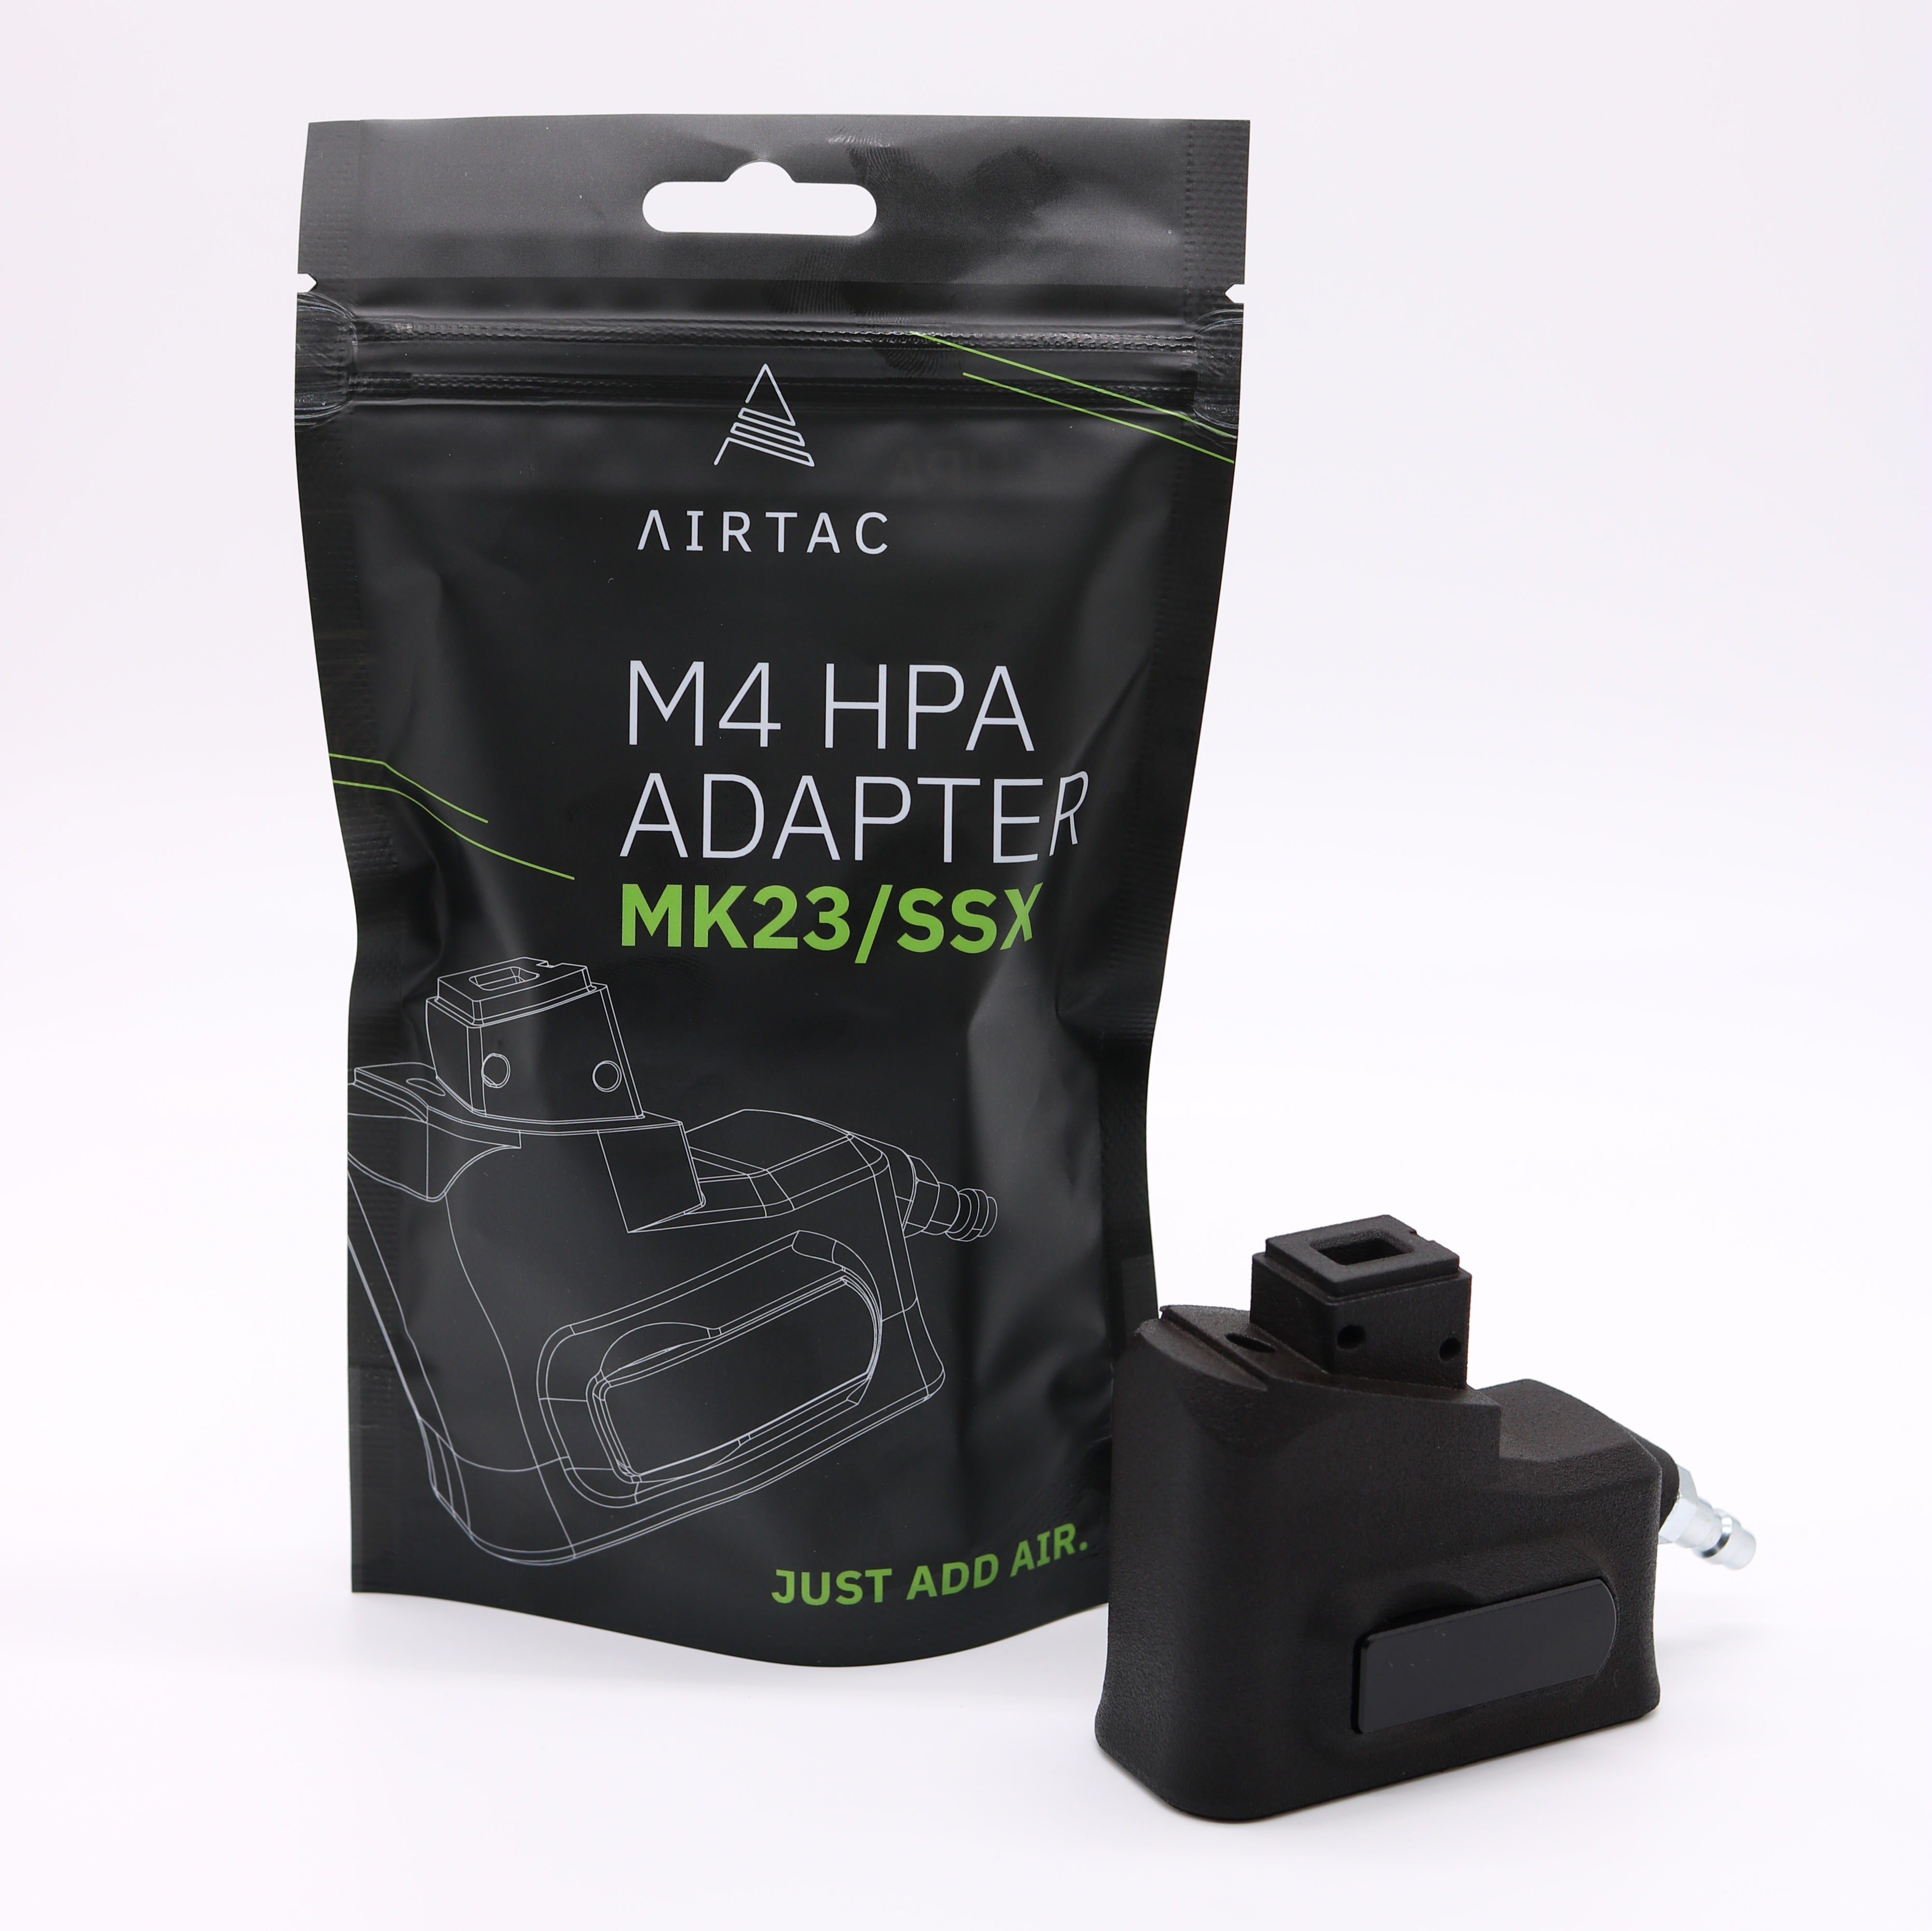 AirTac MK23 HPA M4 Adapter